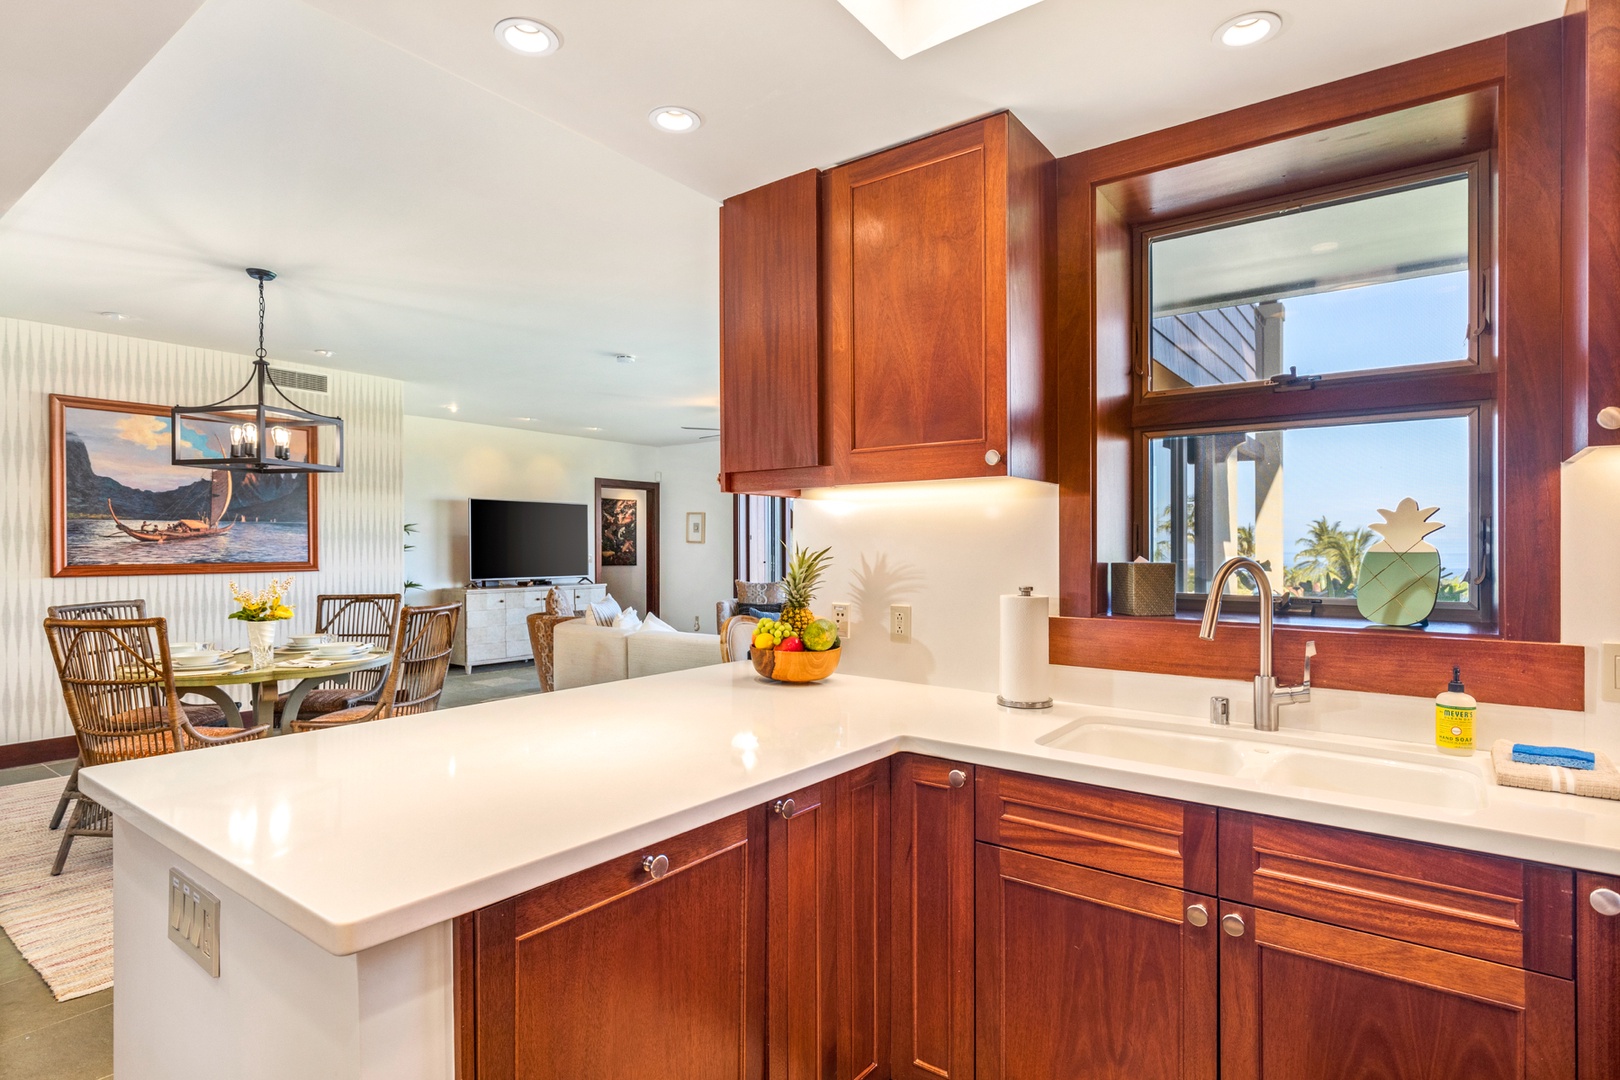 Kailua Kona Vacation Rentals, 3BD Hainoa Villa (2907C) at Four Seasons Resort at Hualalai - Ocean views from your kitchen sink! Open counter into great room allows for ease and flow during meal prep.